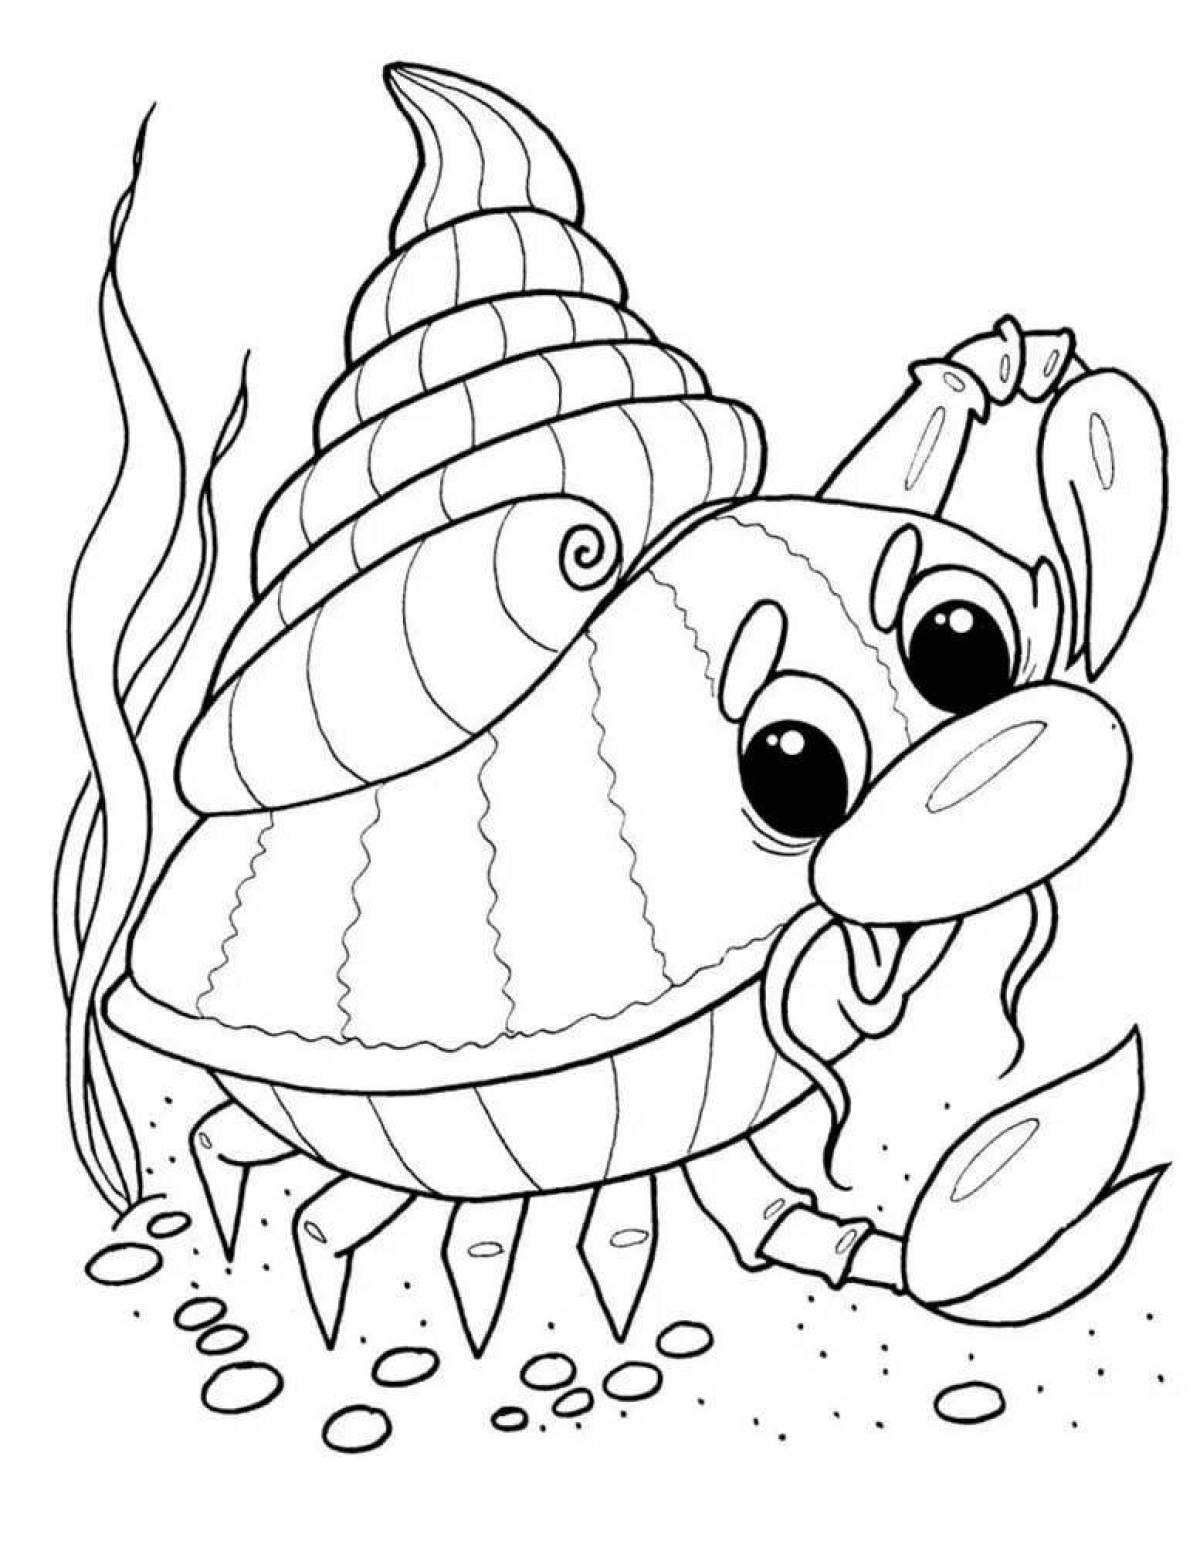 Colorful marine life coloring book for 5-6 year olds